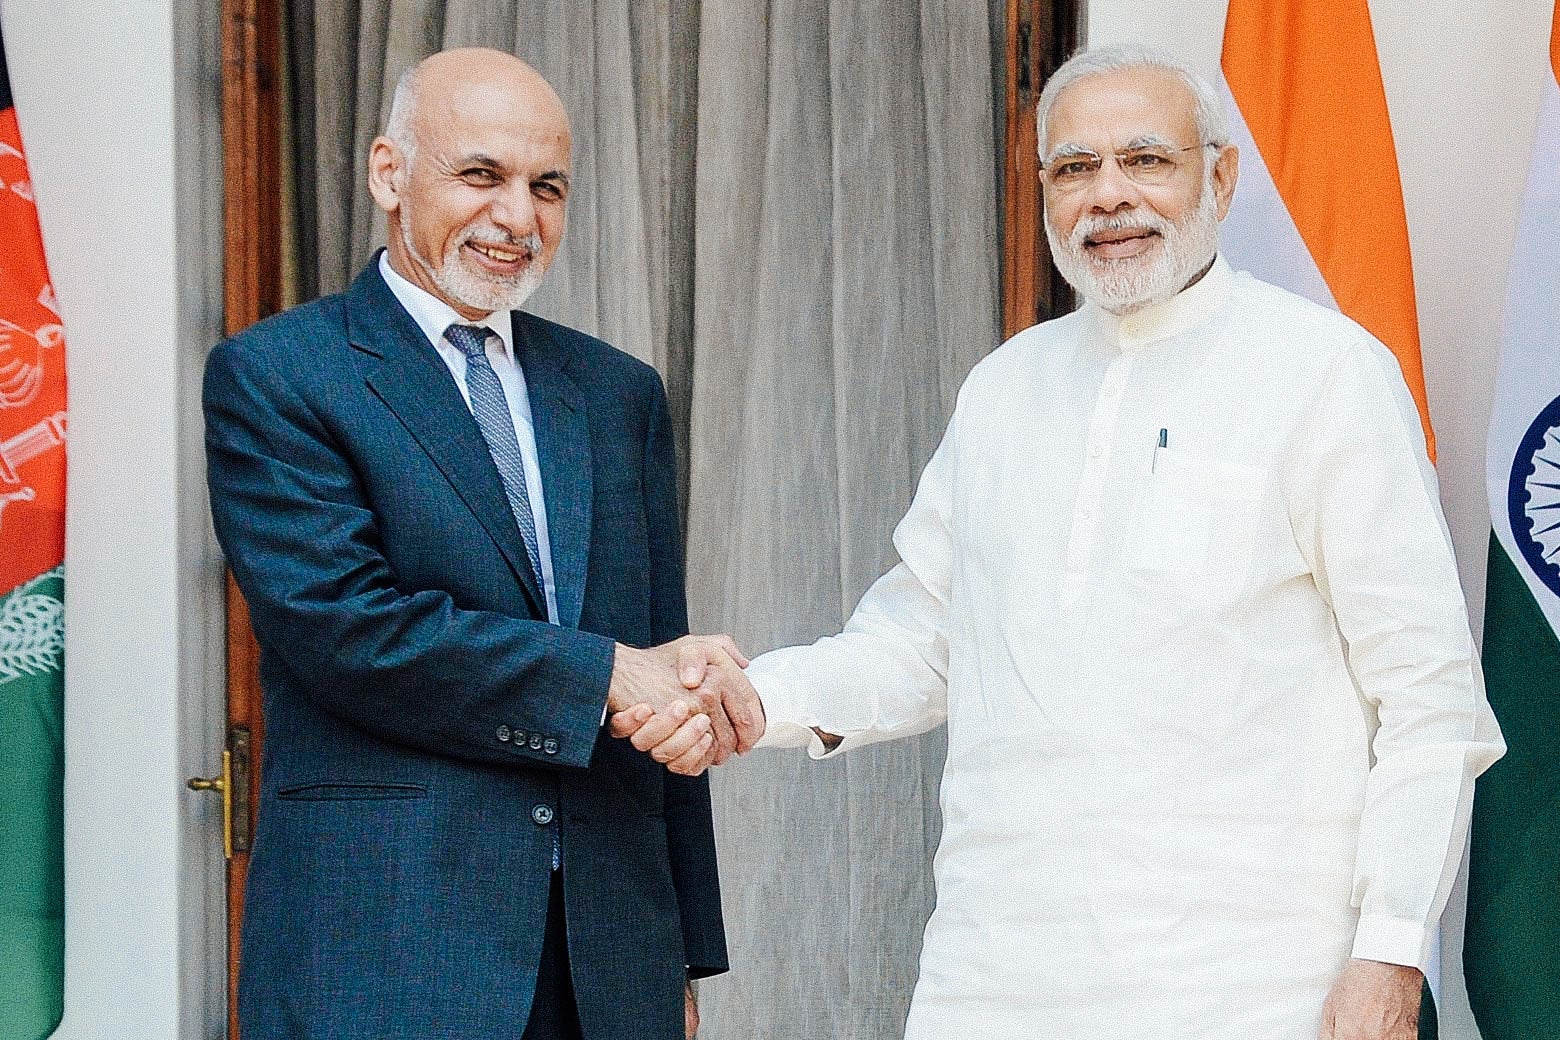 Two men shake hands and pose for the camera in front of flags for Afghanistan and India.